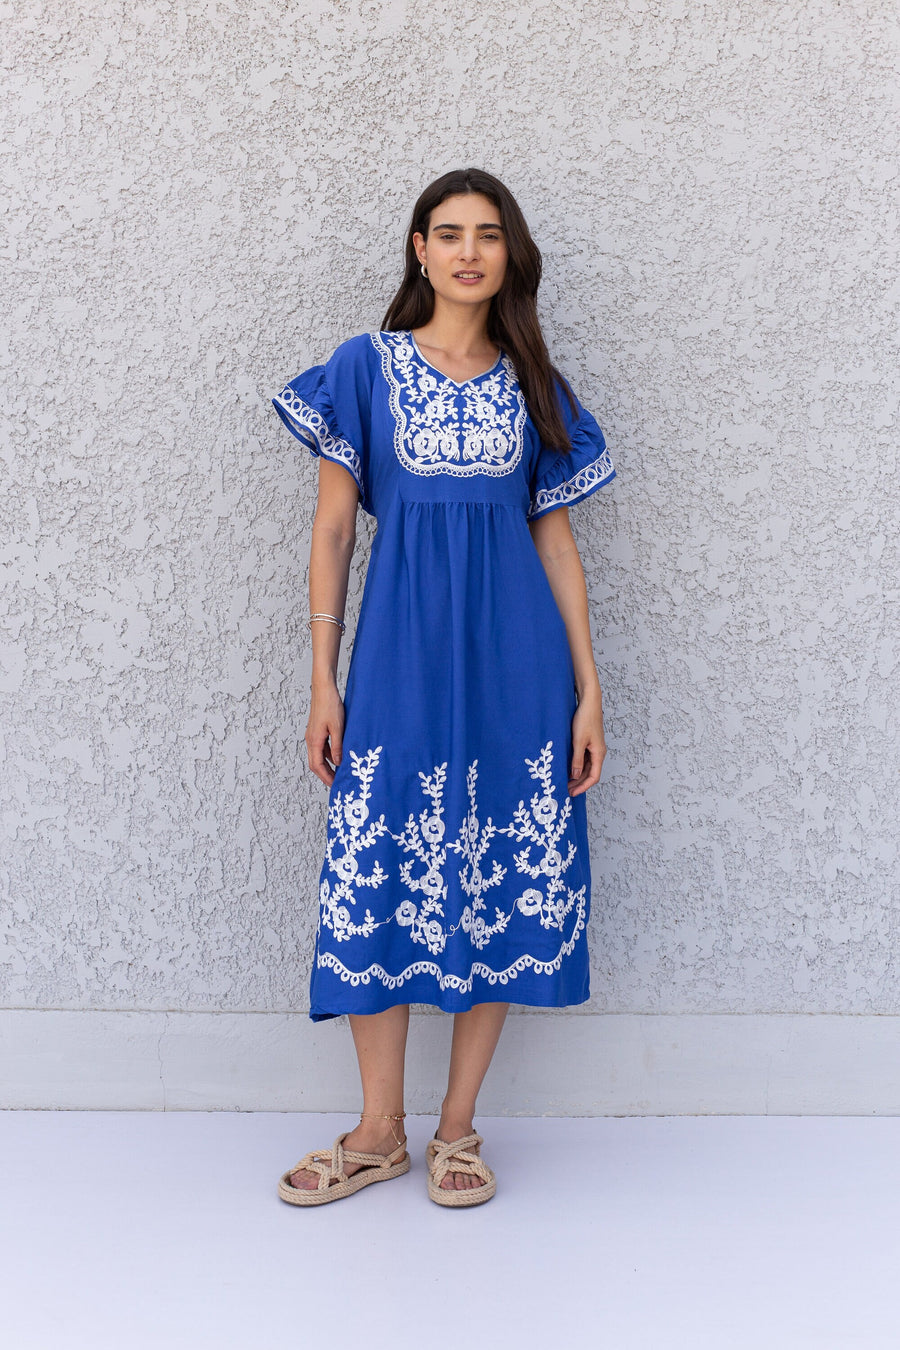 Royal blue cotton Tunic dress, embroidered kaftan dress, short tunic kaftan, cotton embroidered tunic dress, Summer tunic, vacation tunic